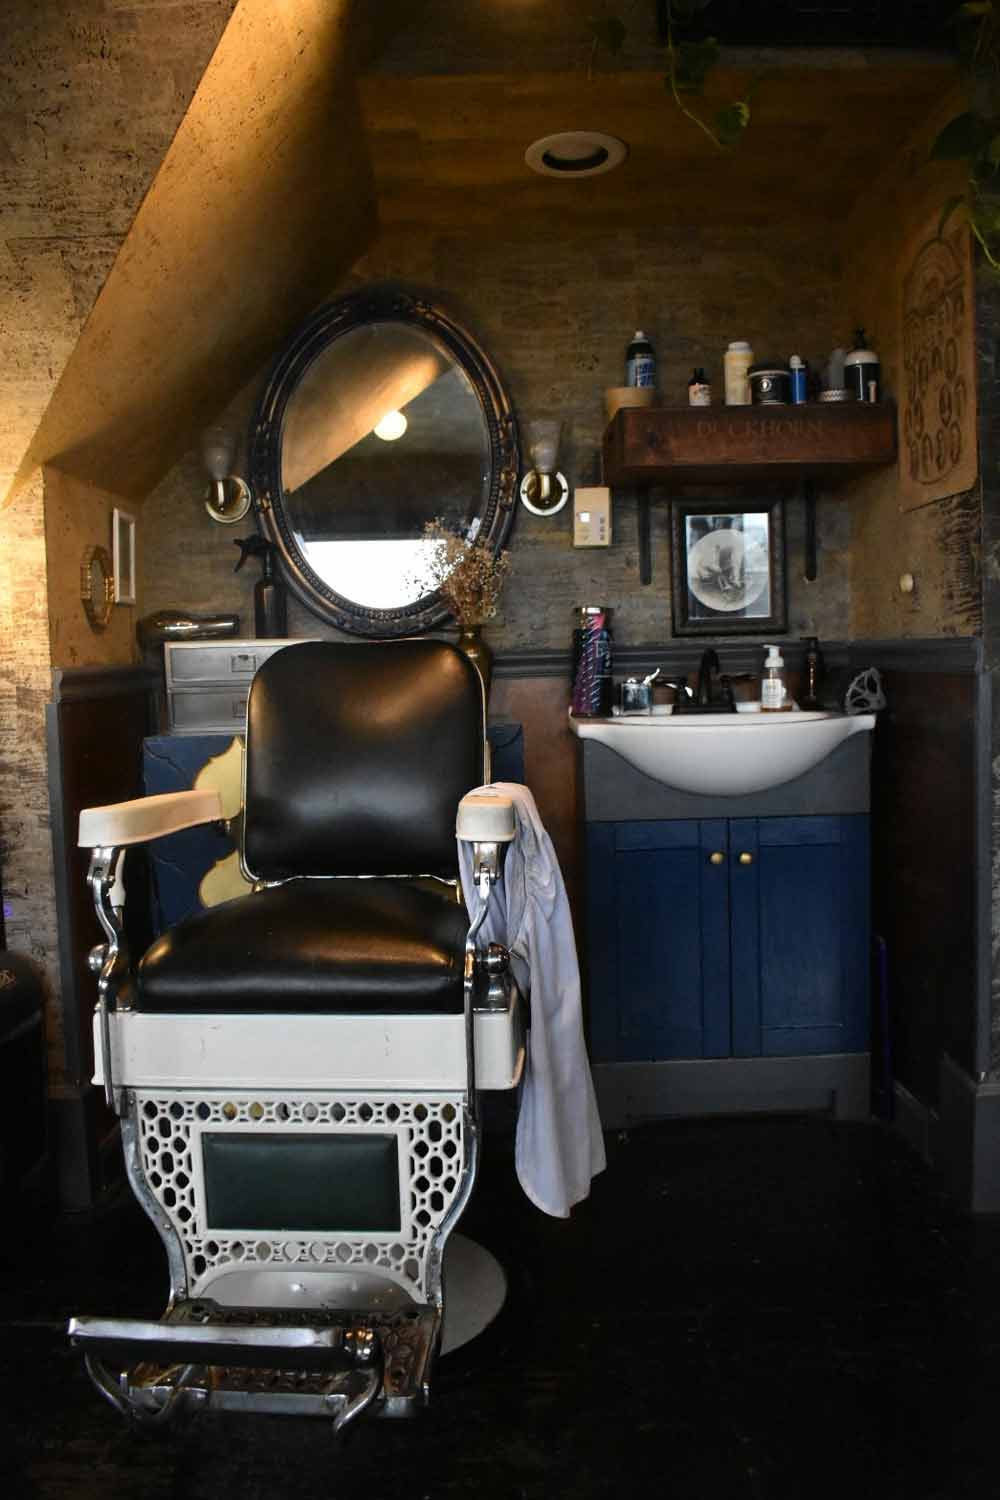 Goodfellows Tonsorial Parlor - A Classic Barber Experience 4